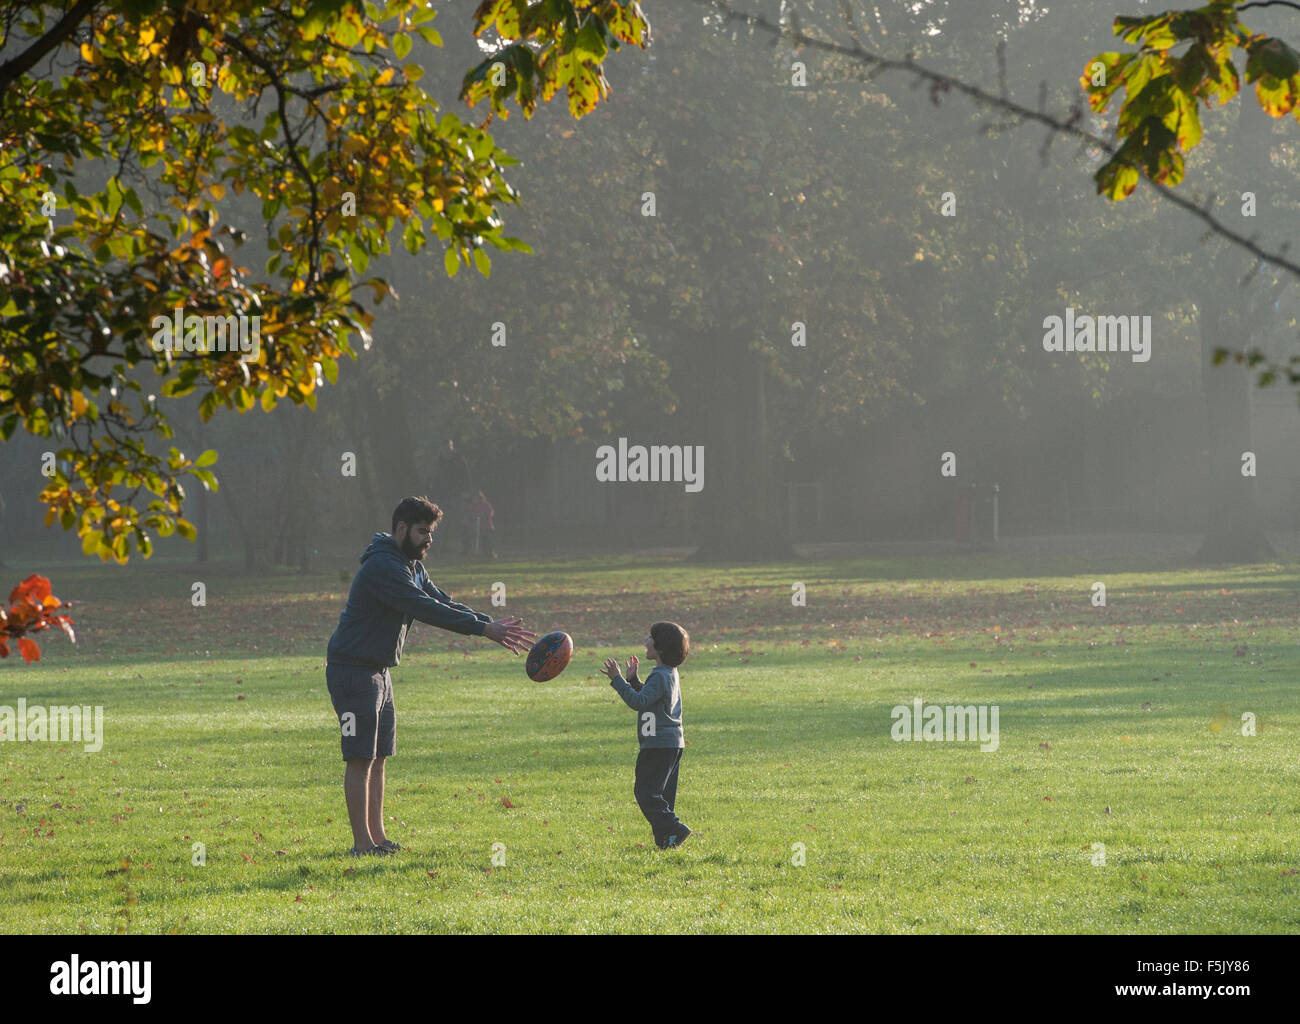 A father and son play rugby together in a park Stock Photo